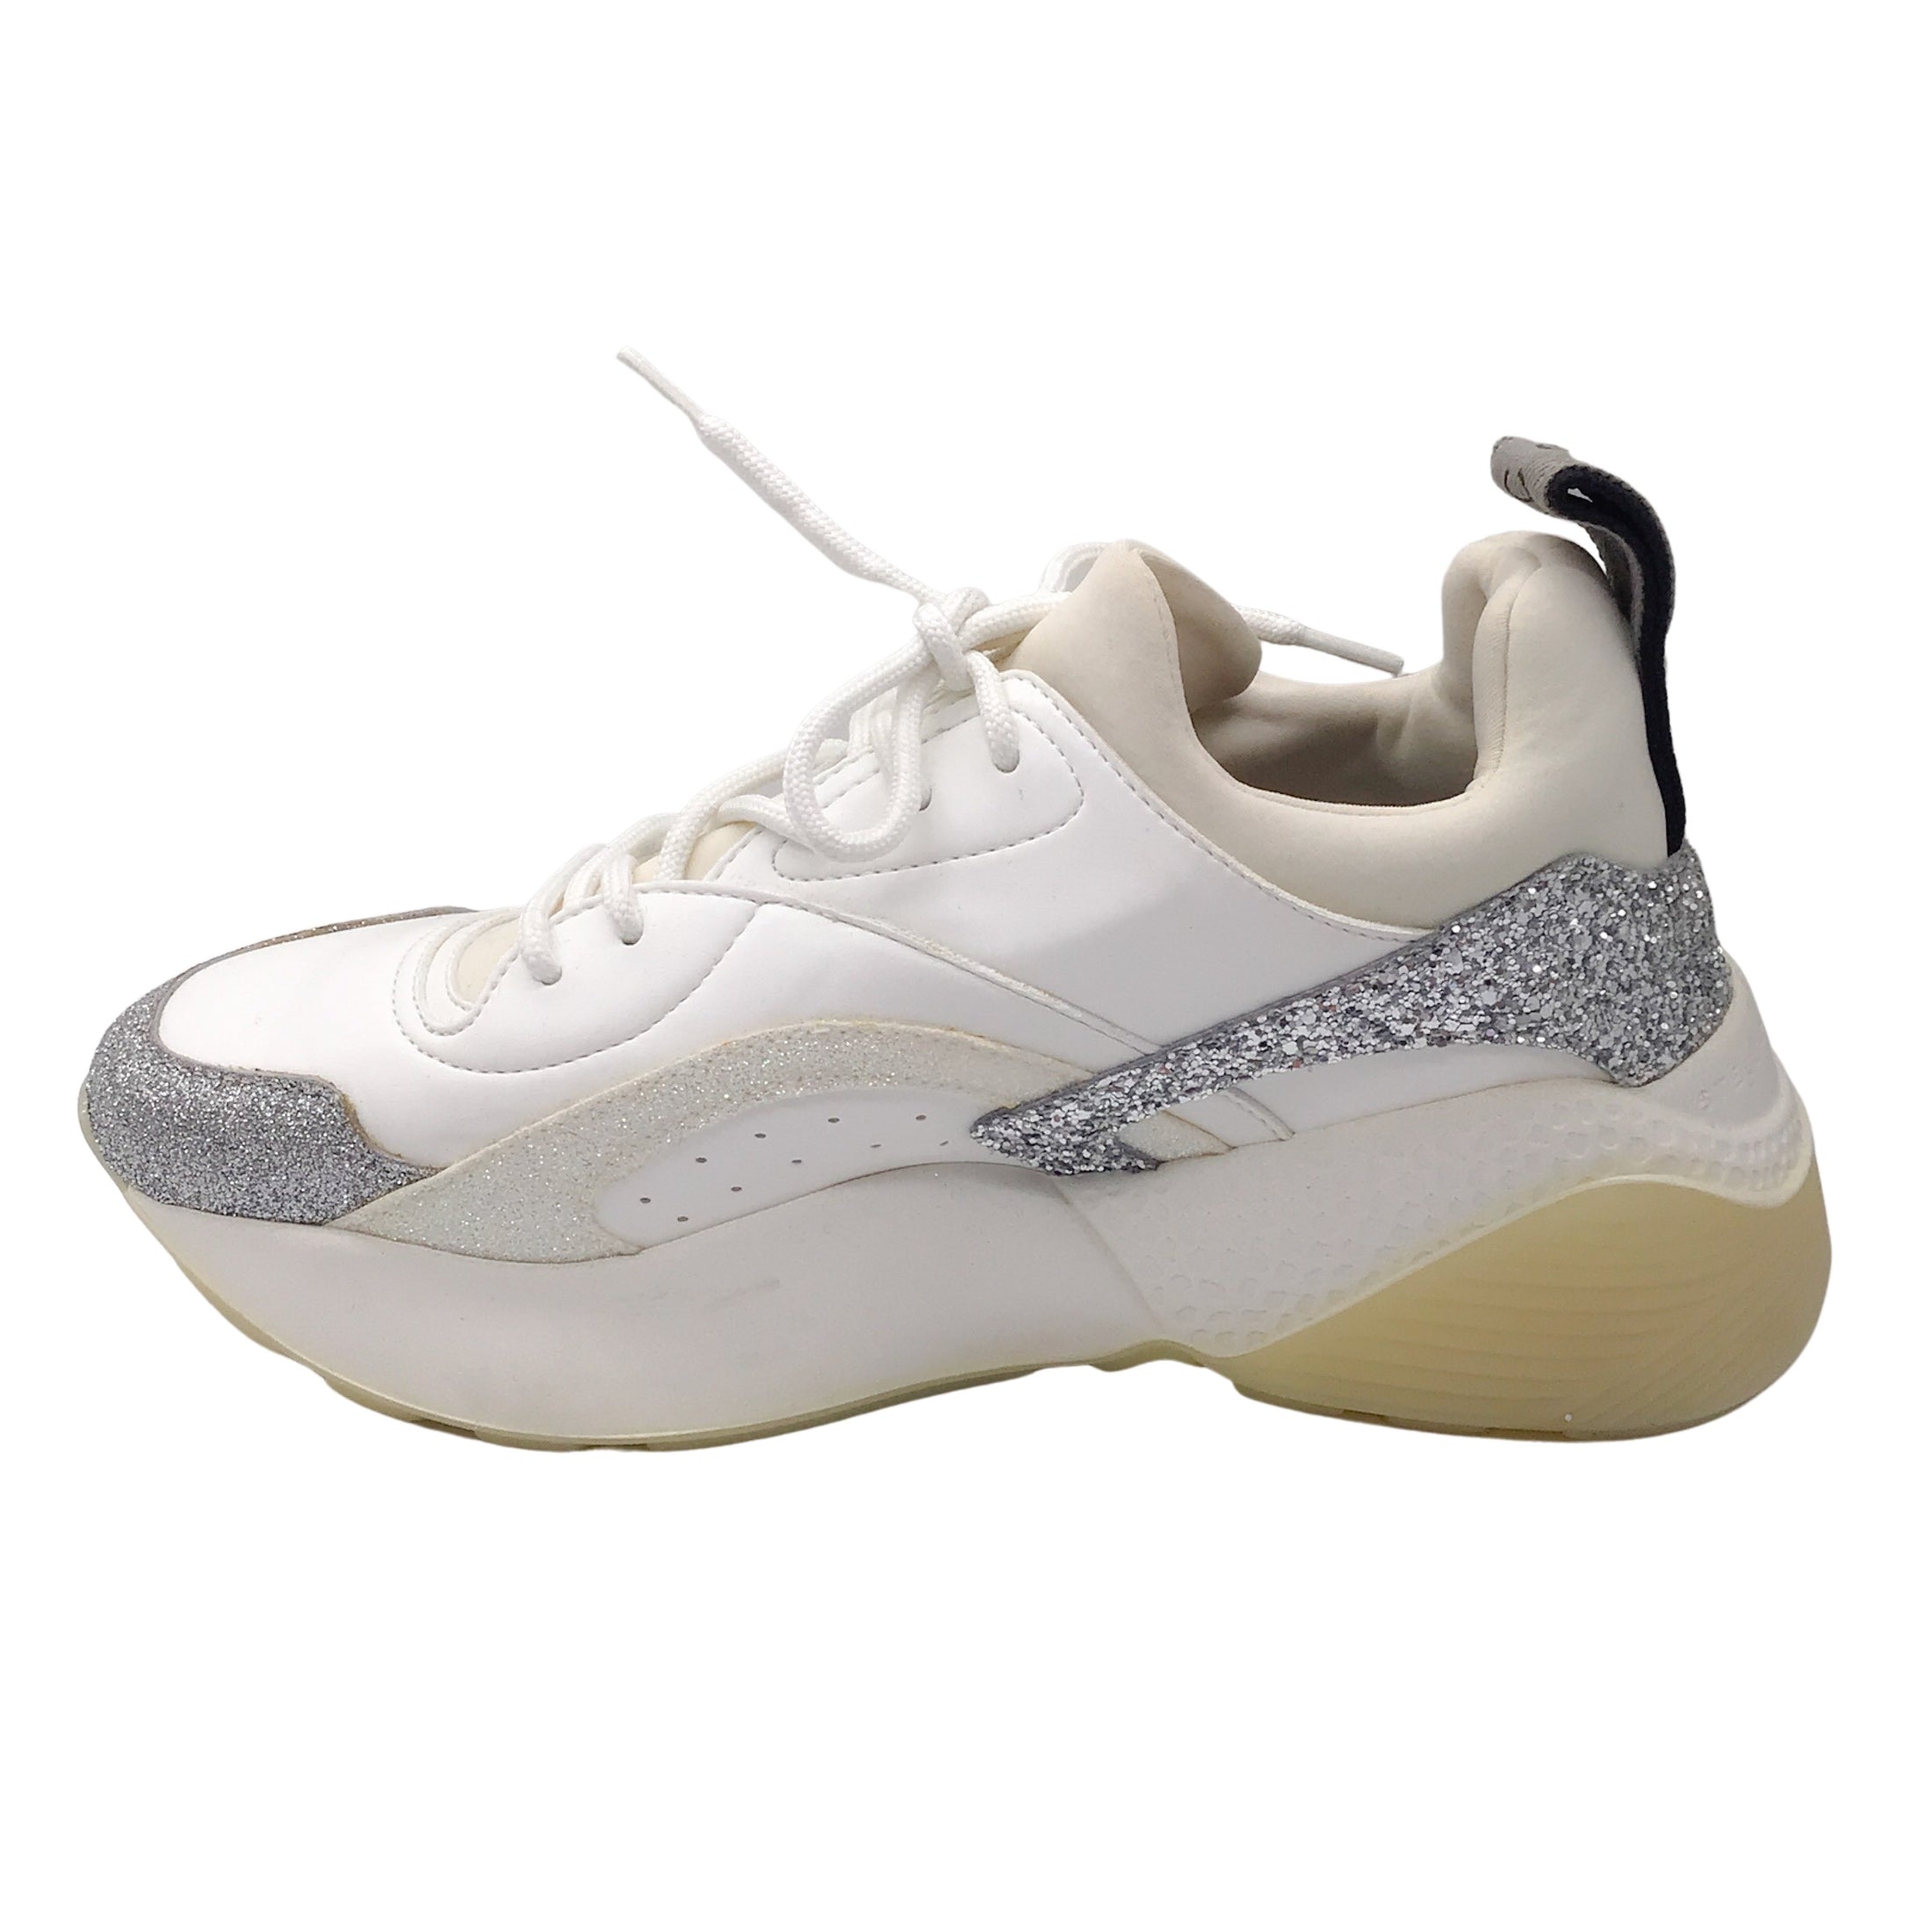 Stella McCartney Eclypse White / Silver Metallic Glitter Detail Chunky Sole Lace-up Leather Sneakers